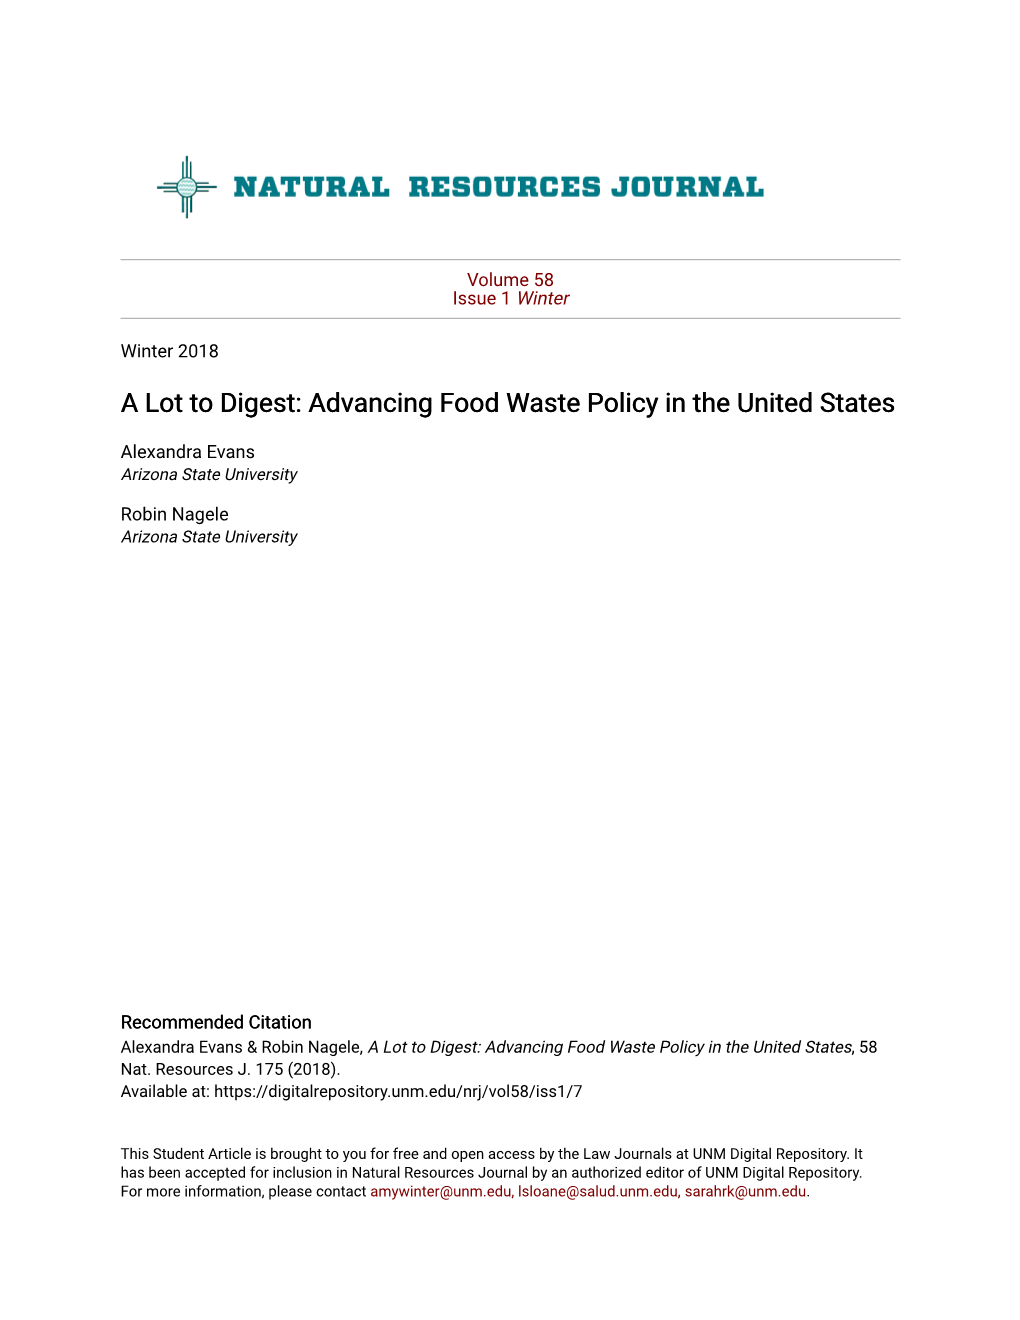 A Lot to Digest: Advancing Food Waste Policy in the United States